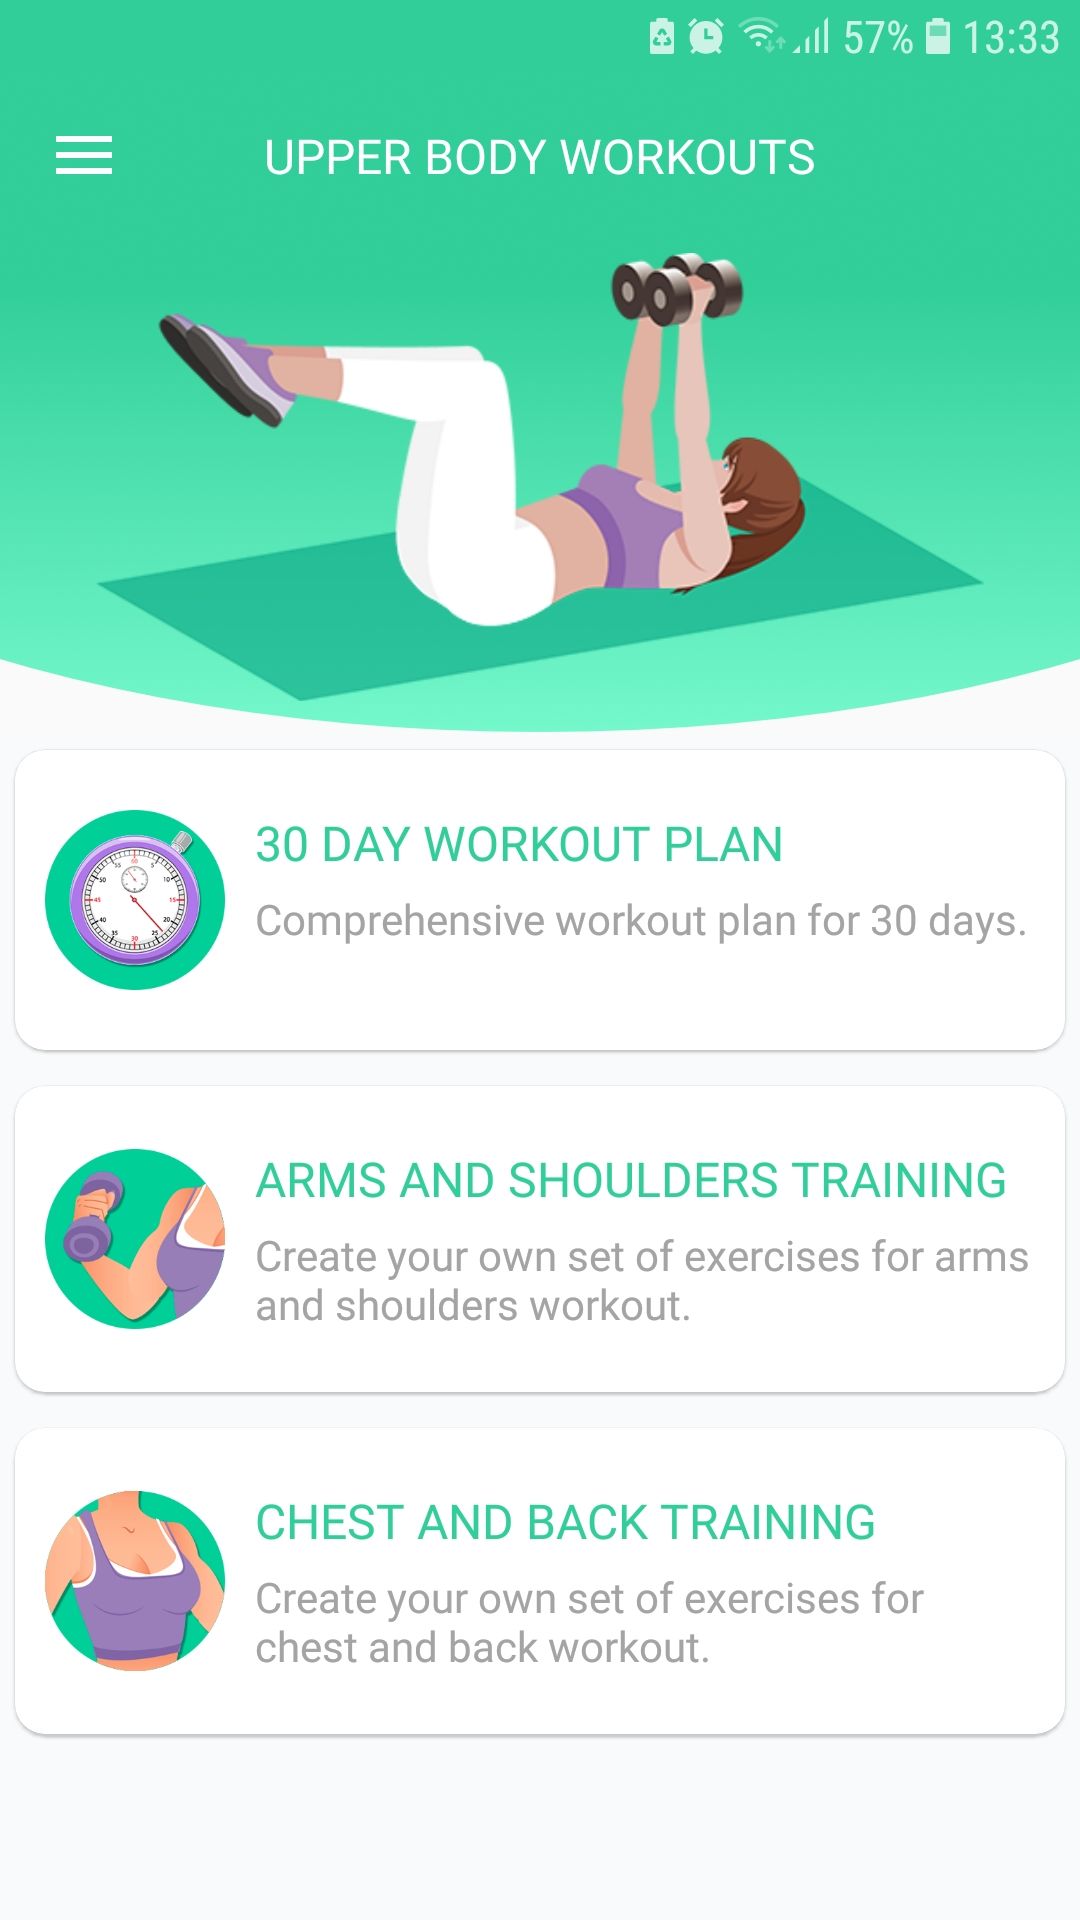 Upper Body Workouts mobile fitness app